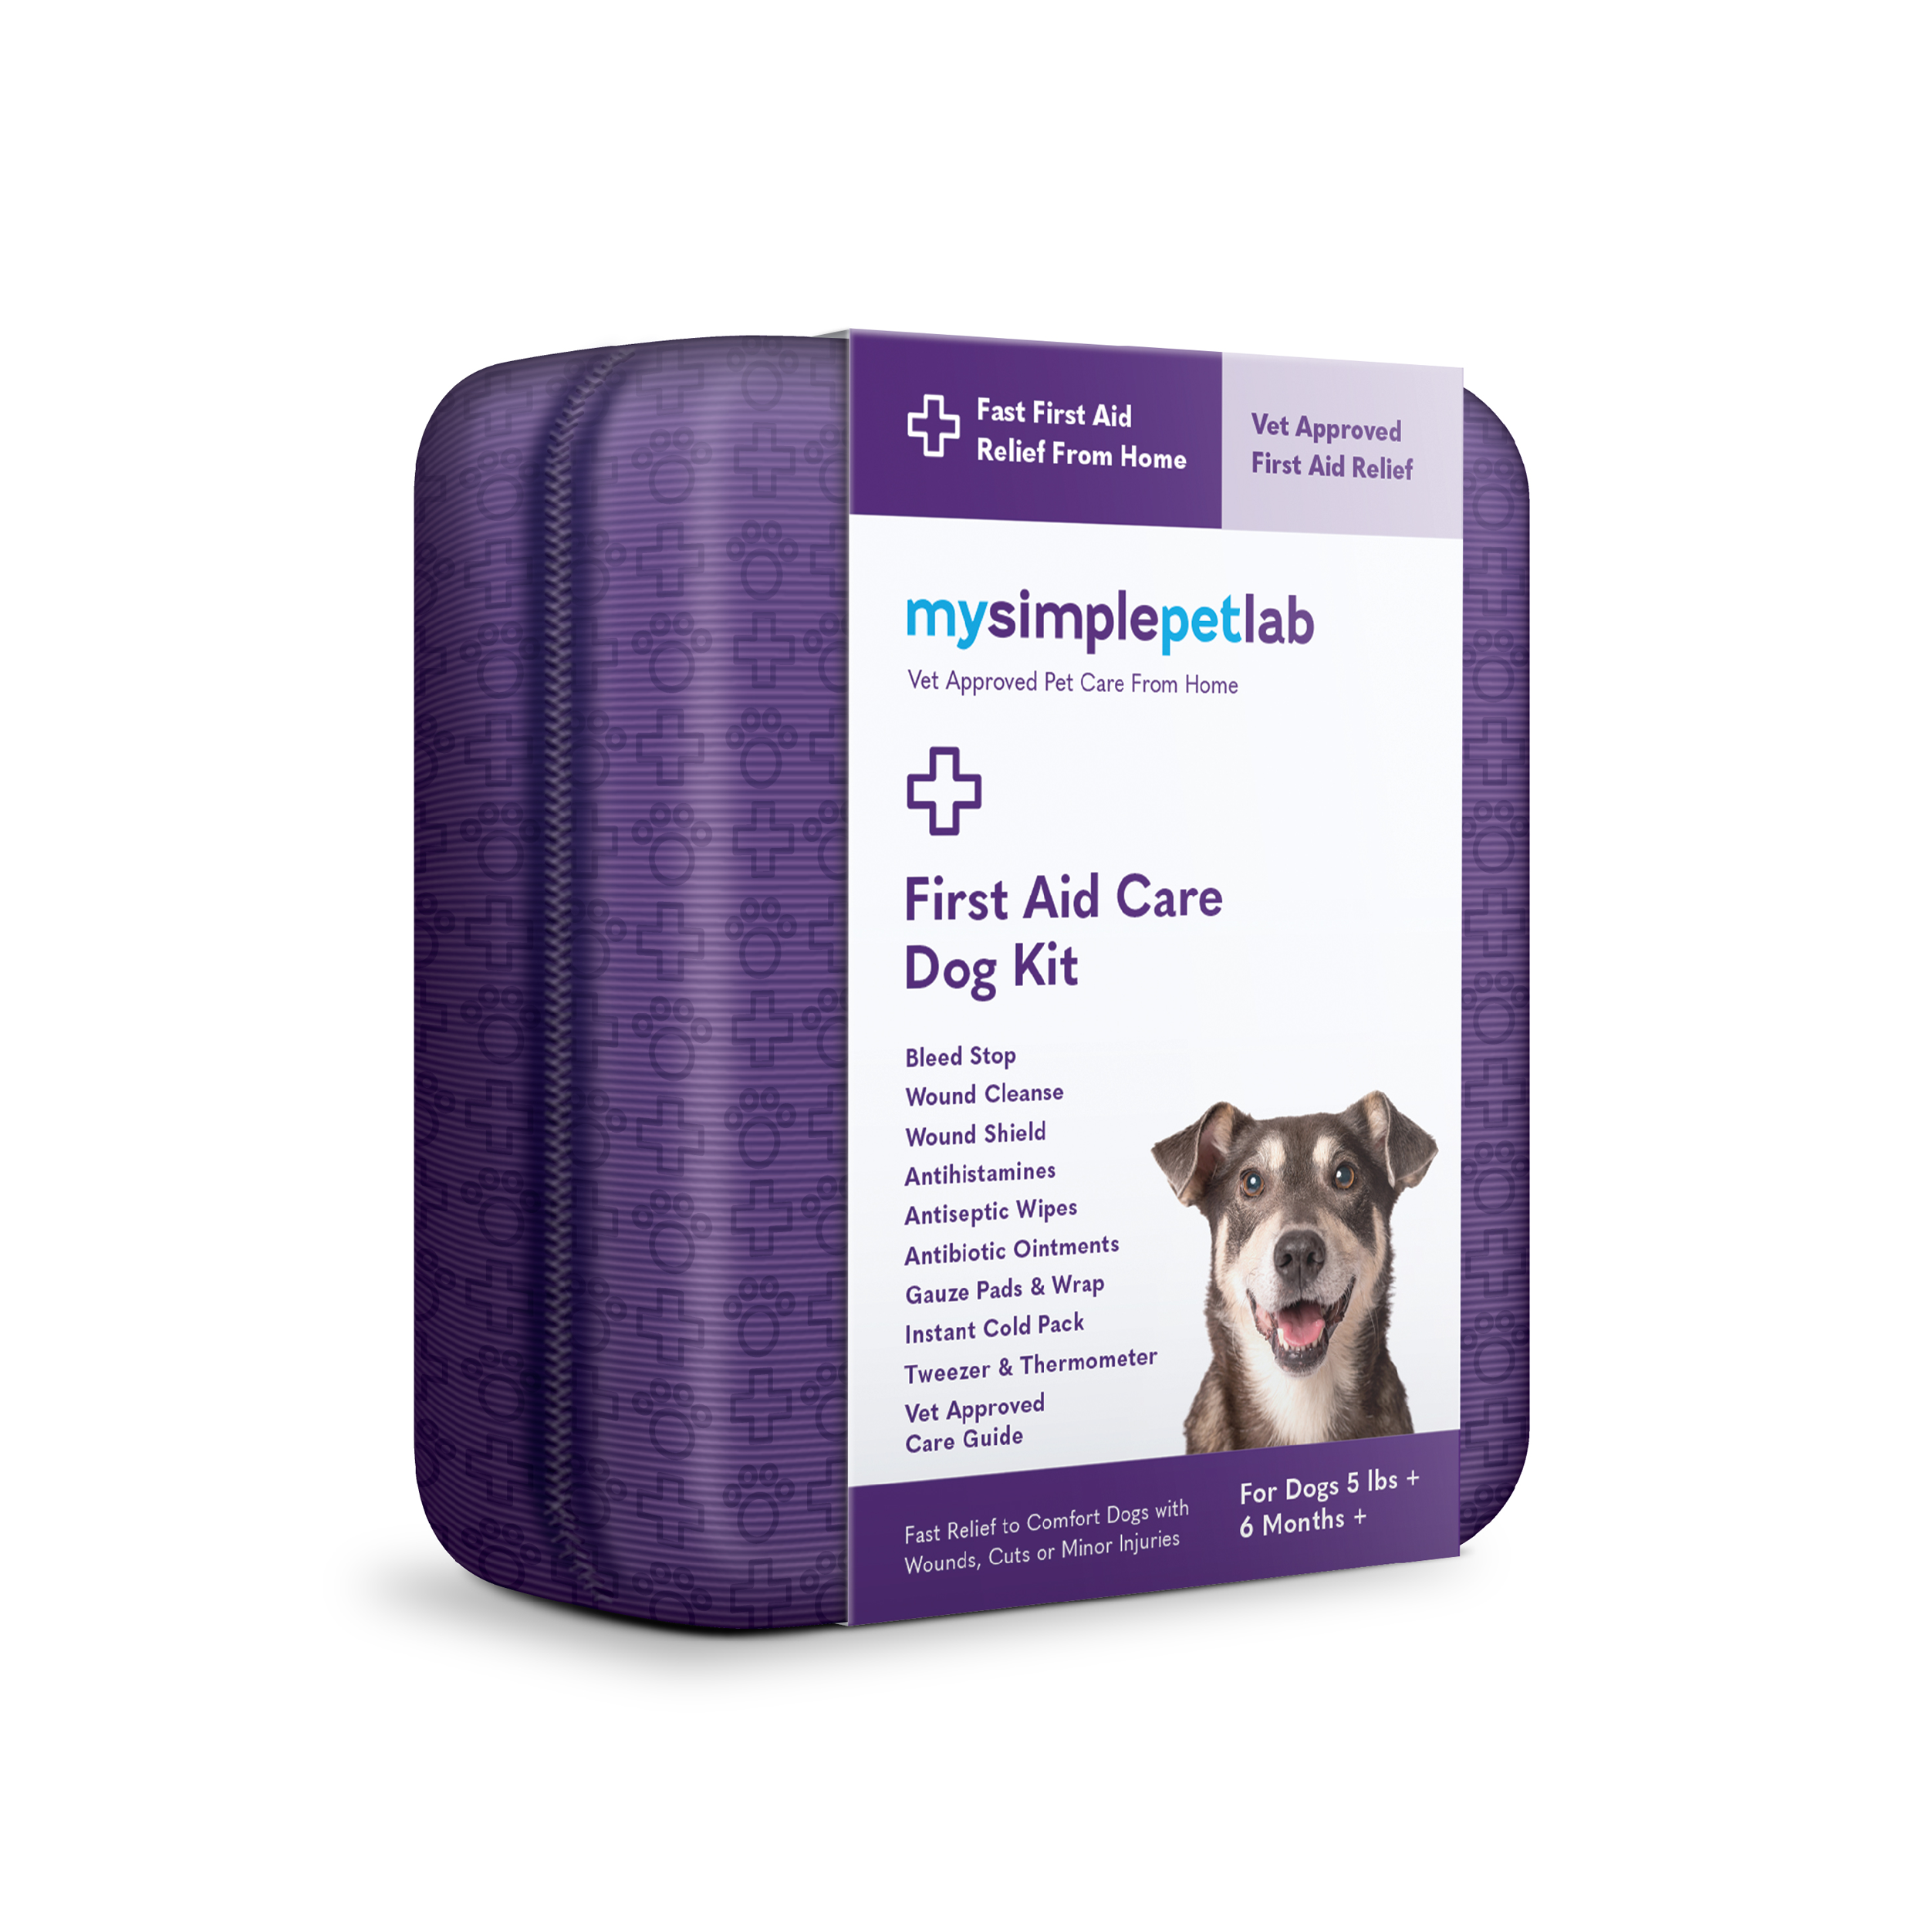 HOME VET BAG: The Ultimate Pet First Aid Kit for Any Pet Care Emergency  with Your Dog or Cat